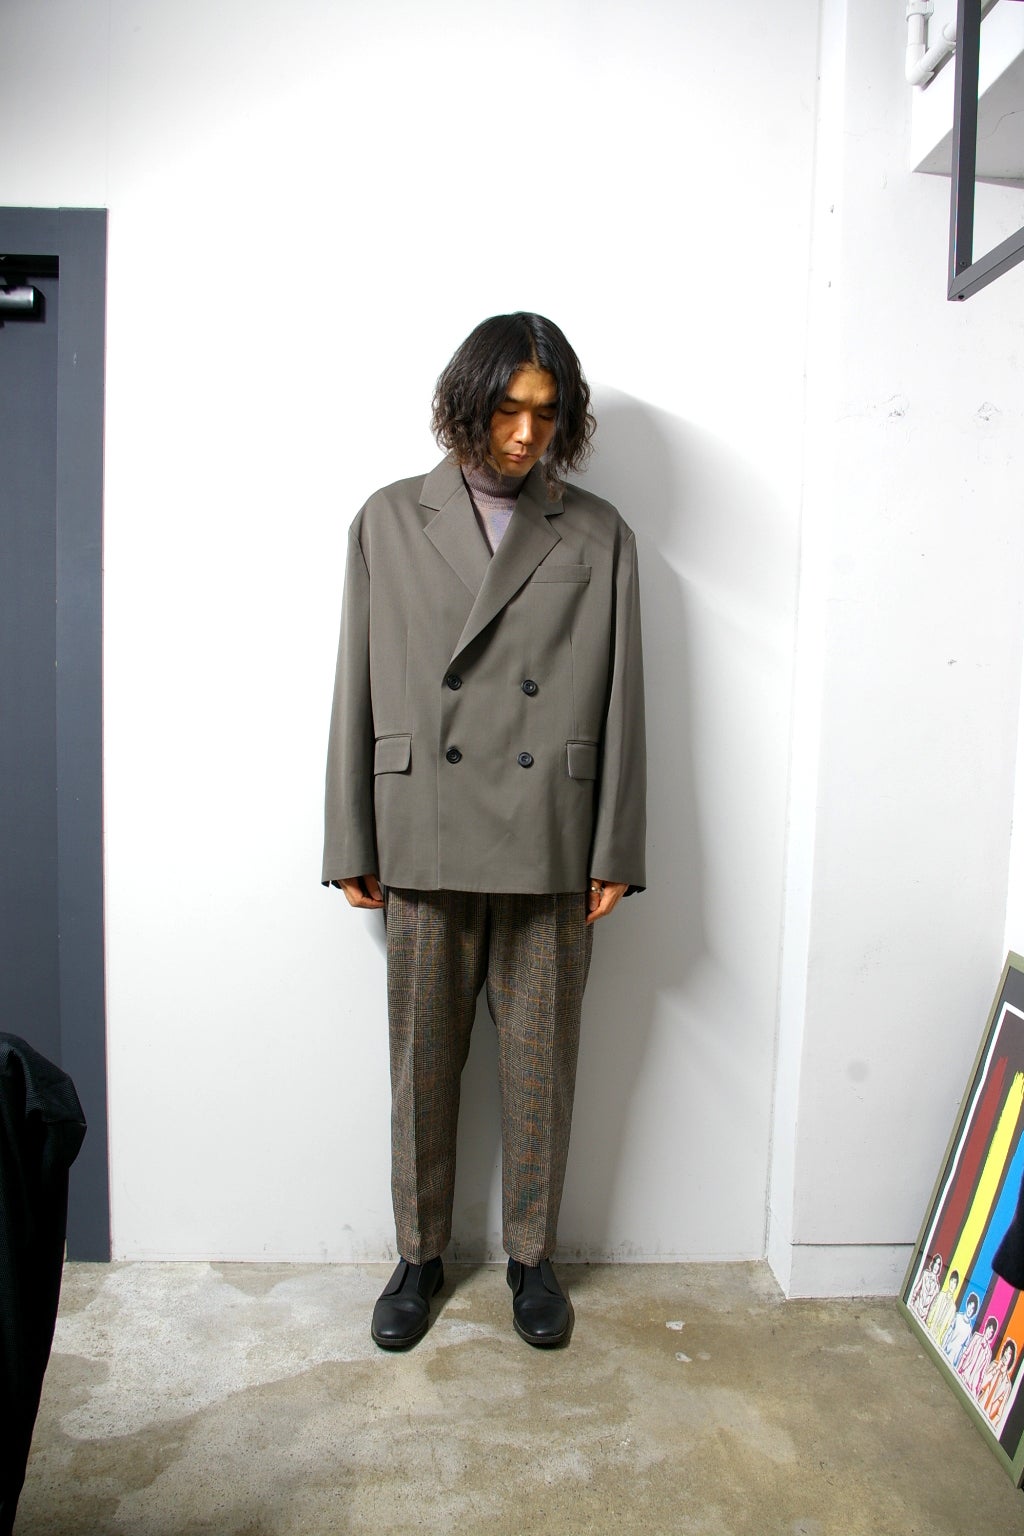 stein(シュタイン)/OVERSIZED DOUBLE BREASTED JACKET/BR 